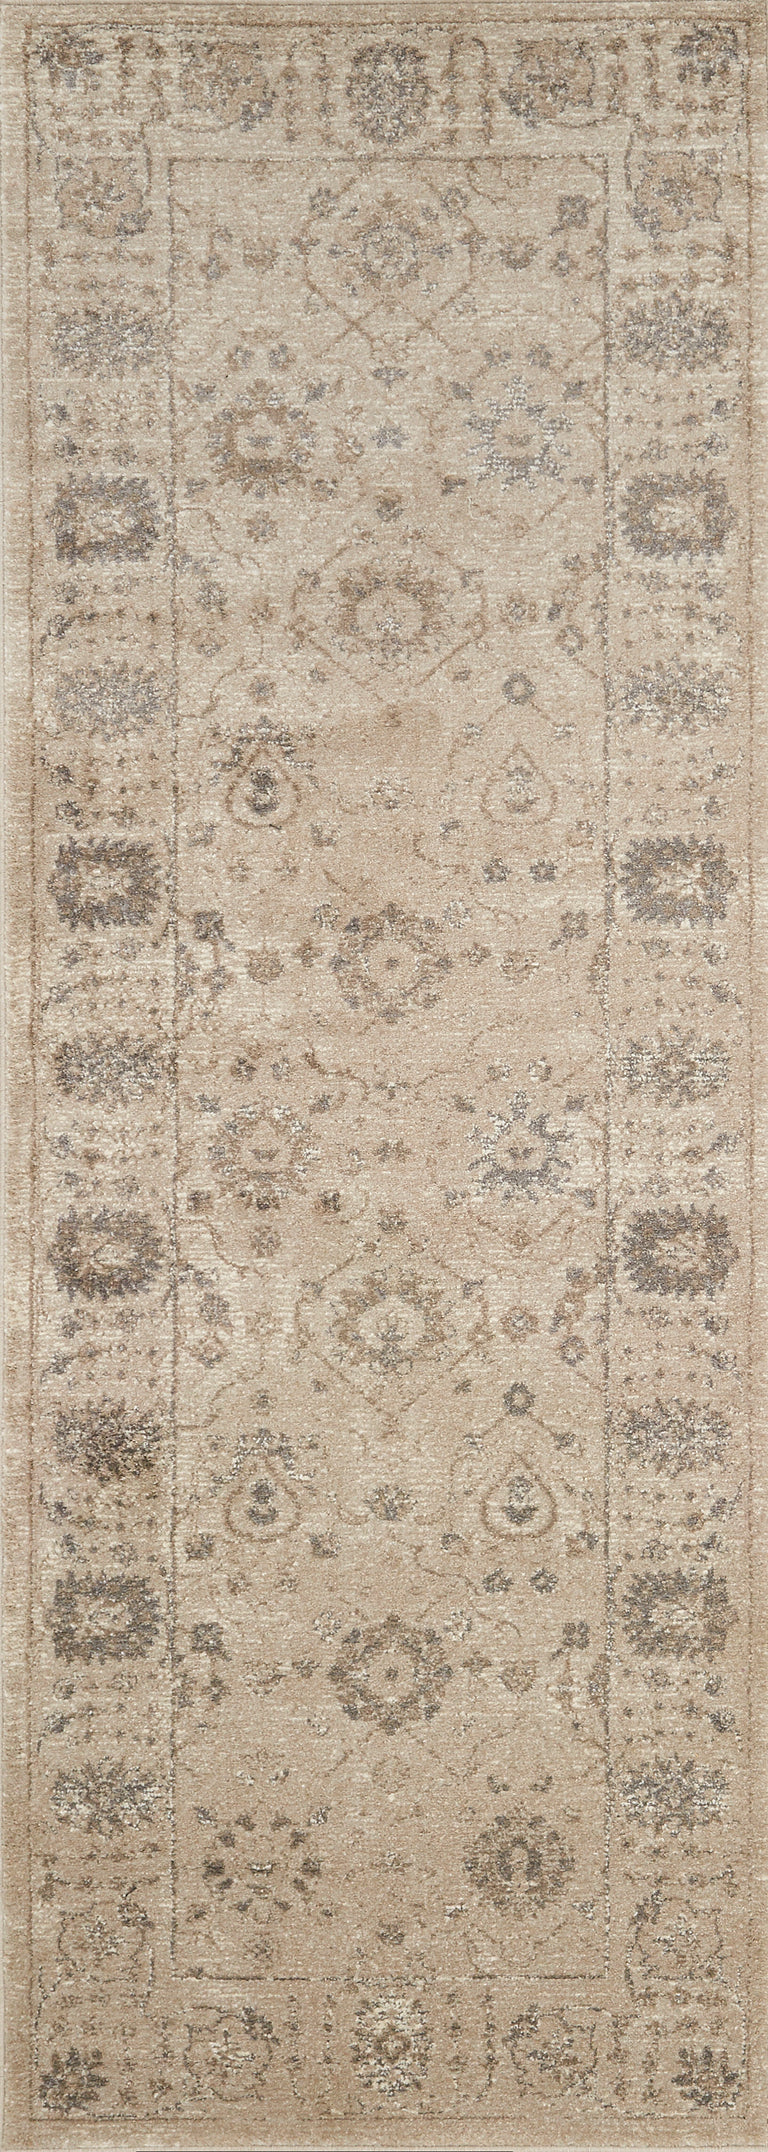 Loloi Rugs Century Collection Rug in Sand, Sand - 7'10" x 10'6"